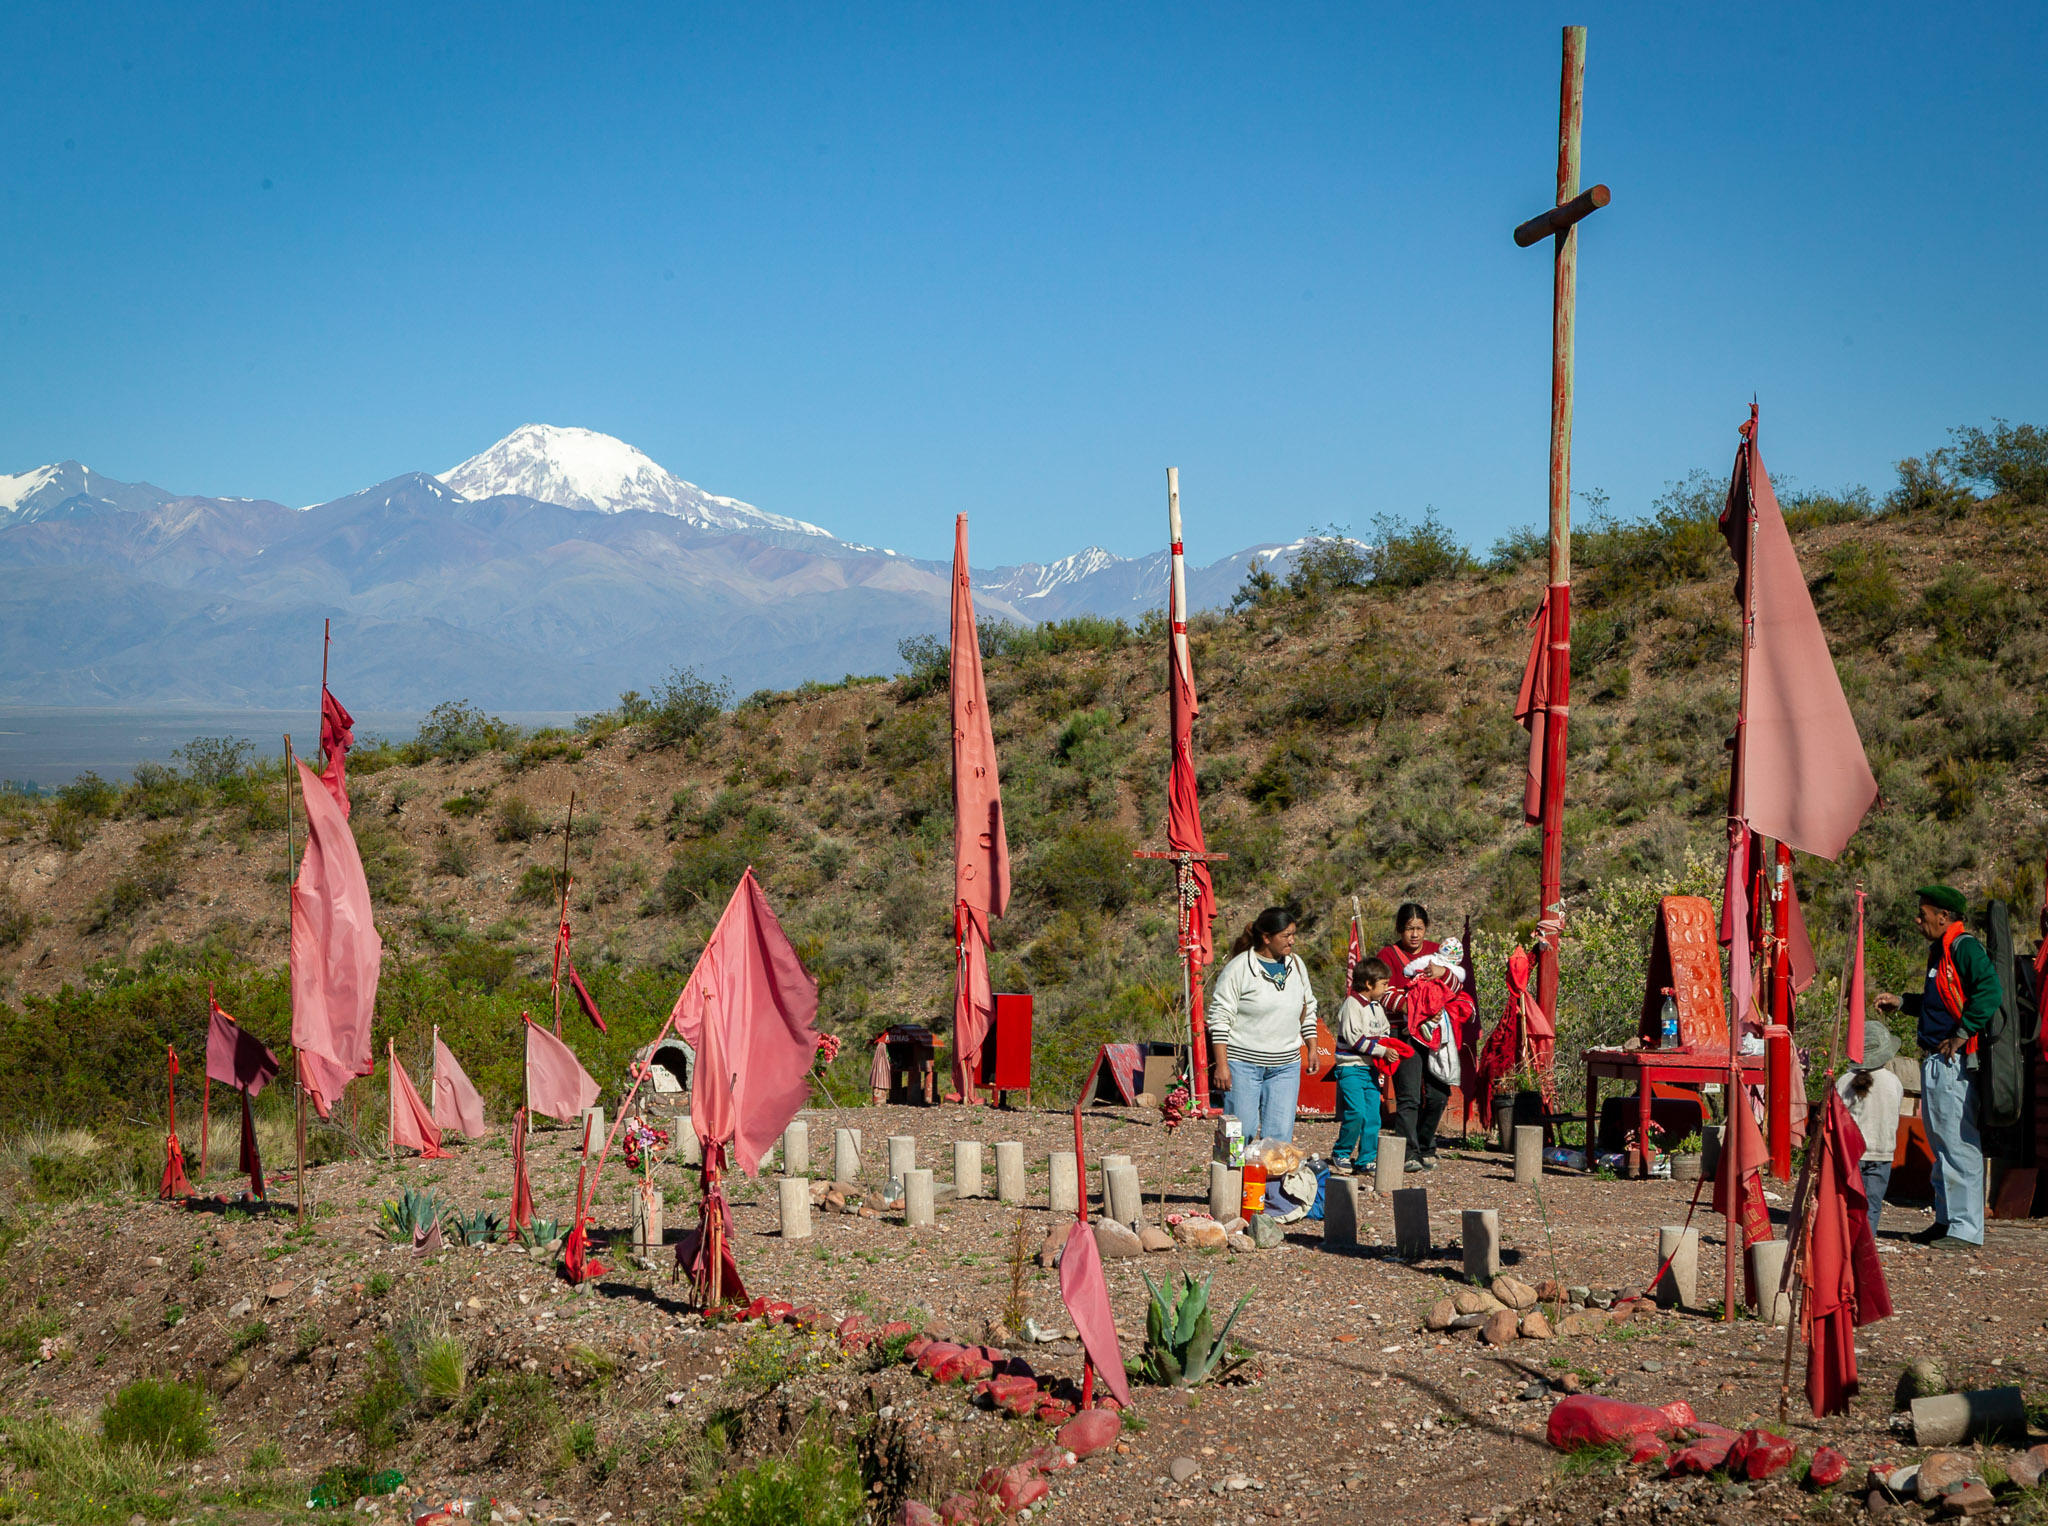 Uco Valley roadside shrine, we can finally see the Andes ... wow!